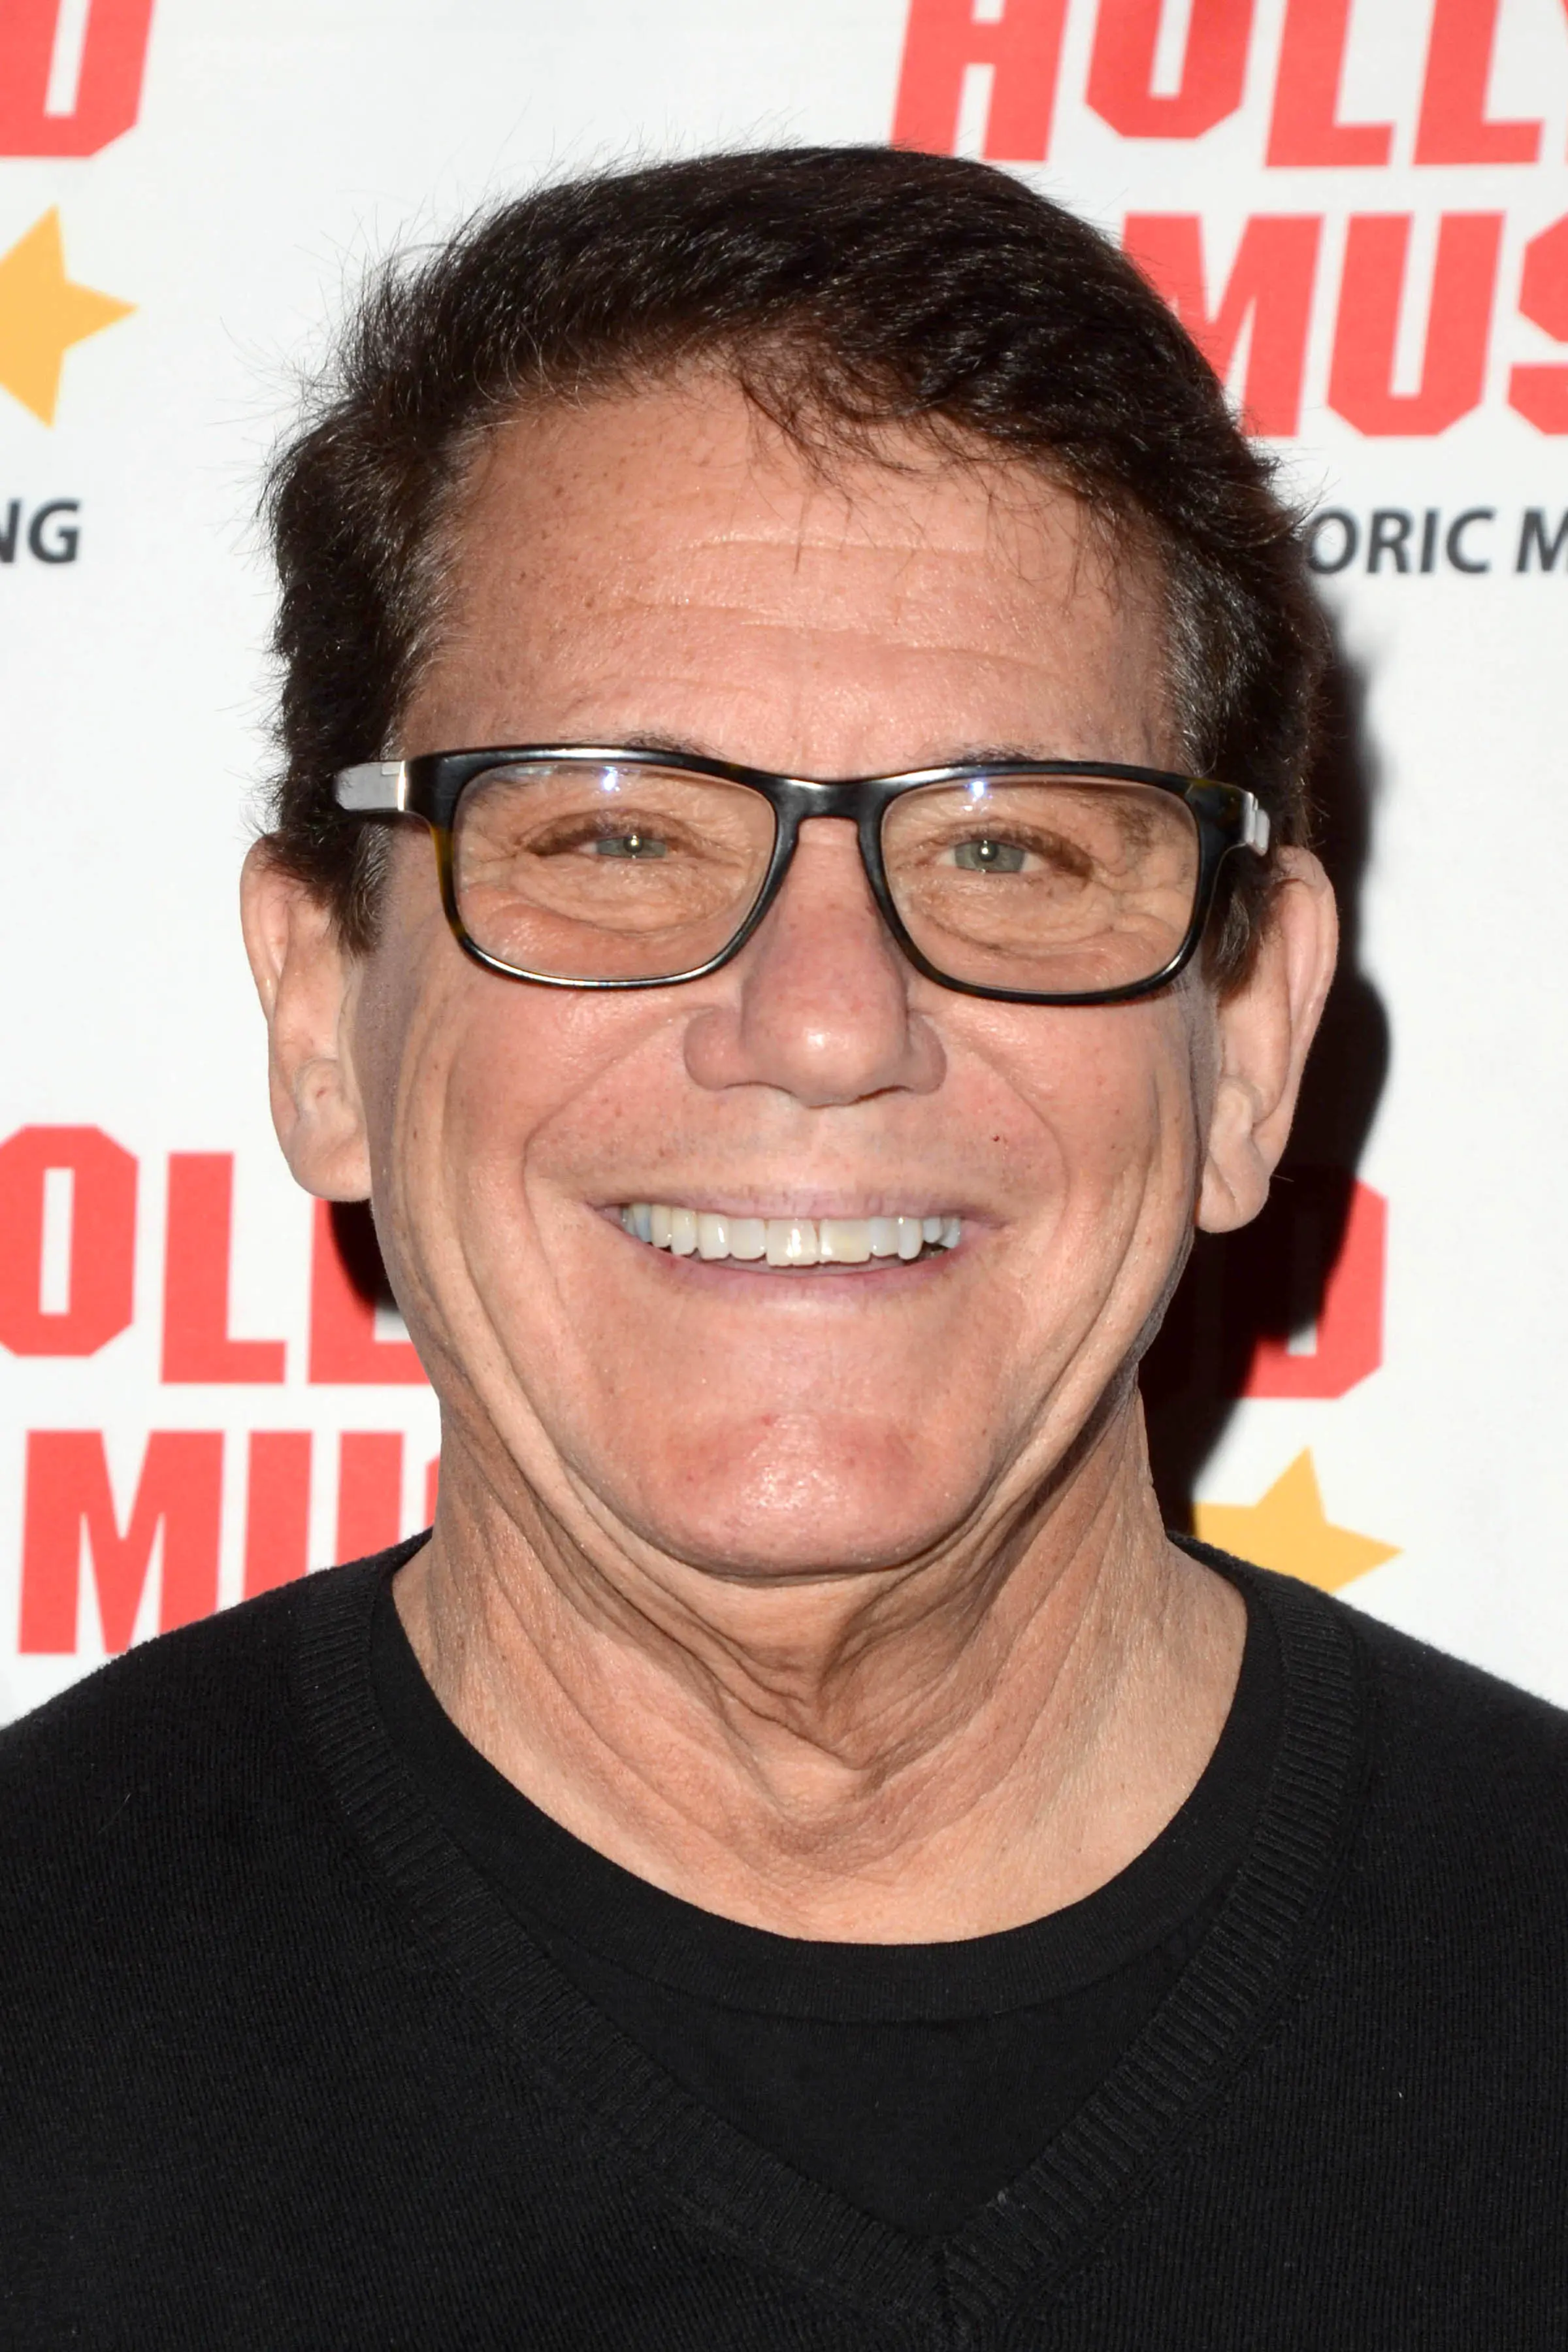 Whatever Happened To Anson Williams From 'Happy Days?'